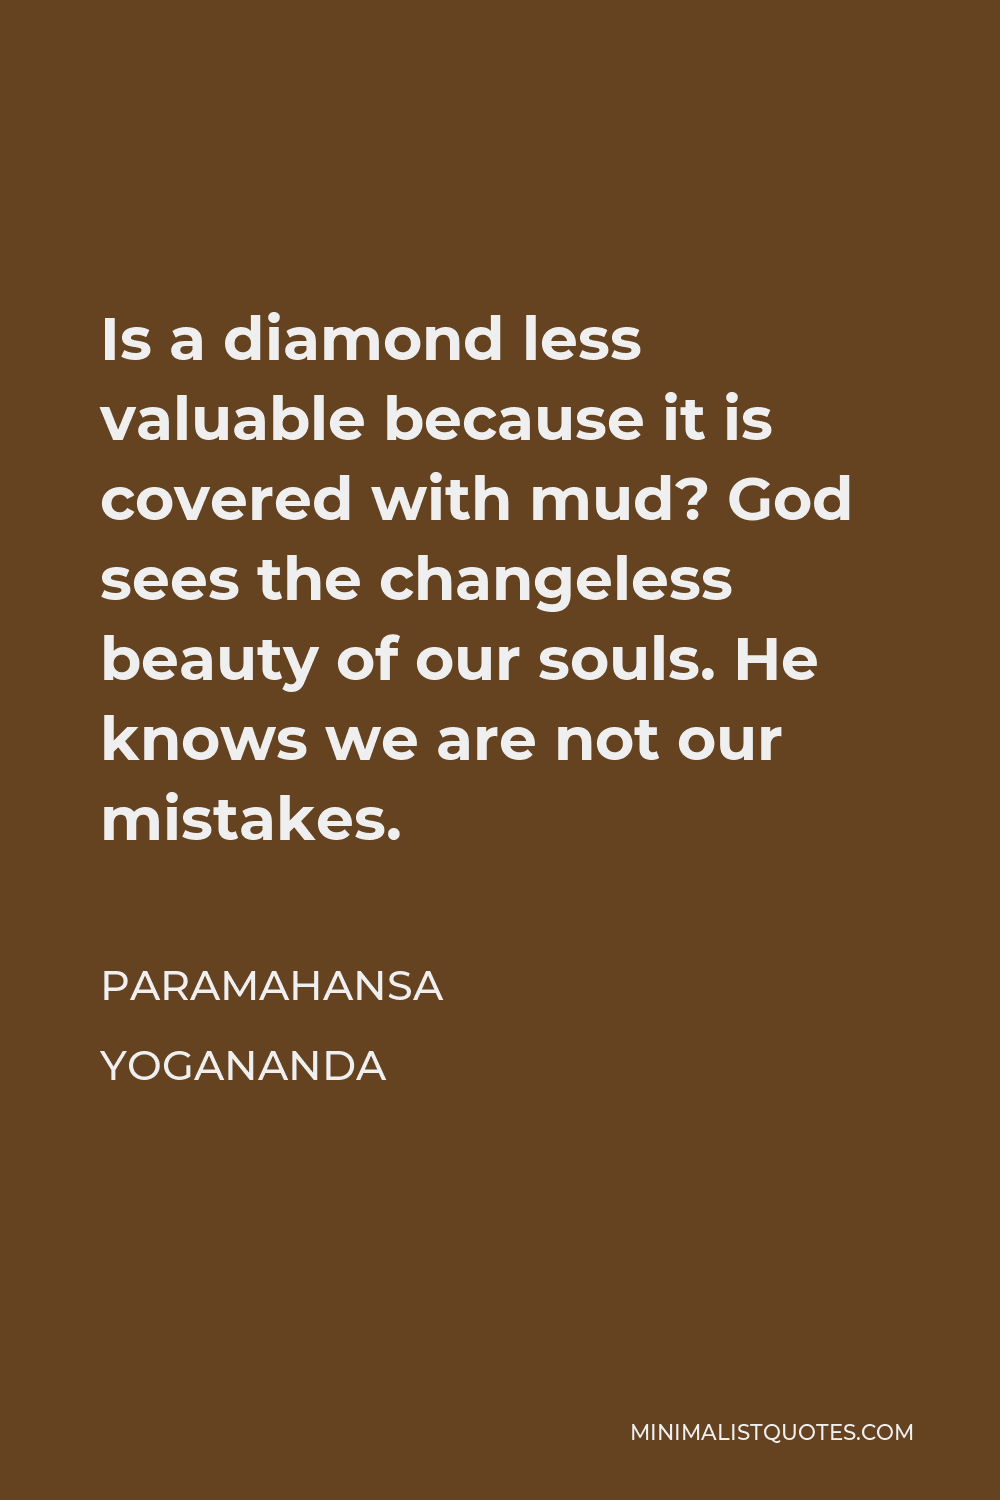 Paramahansa Yogananda Quote - Is a diamond less valuable because it is covered with mud? God sees the changeless beauty of our souls. He knows we are not our mistakes.